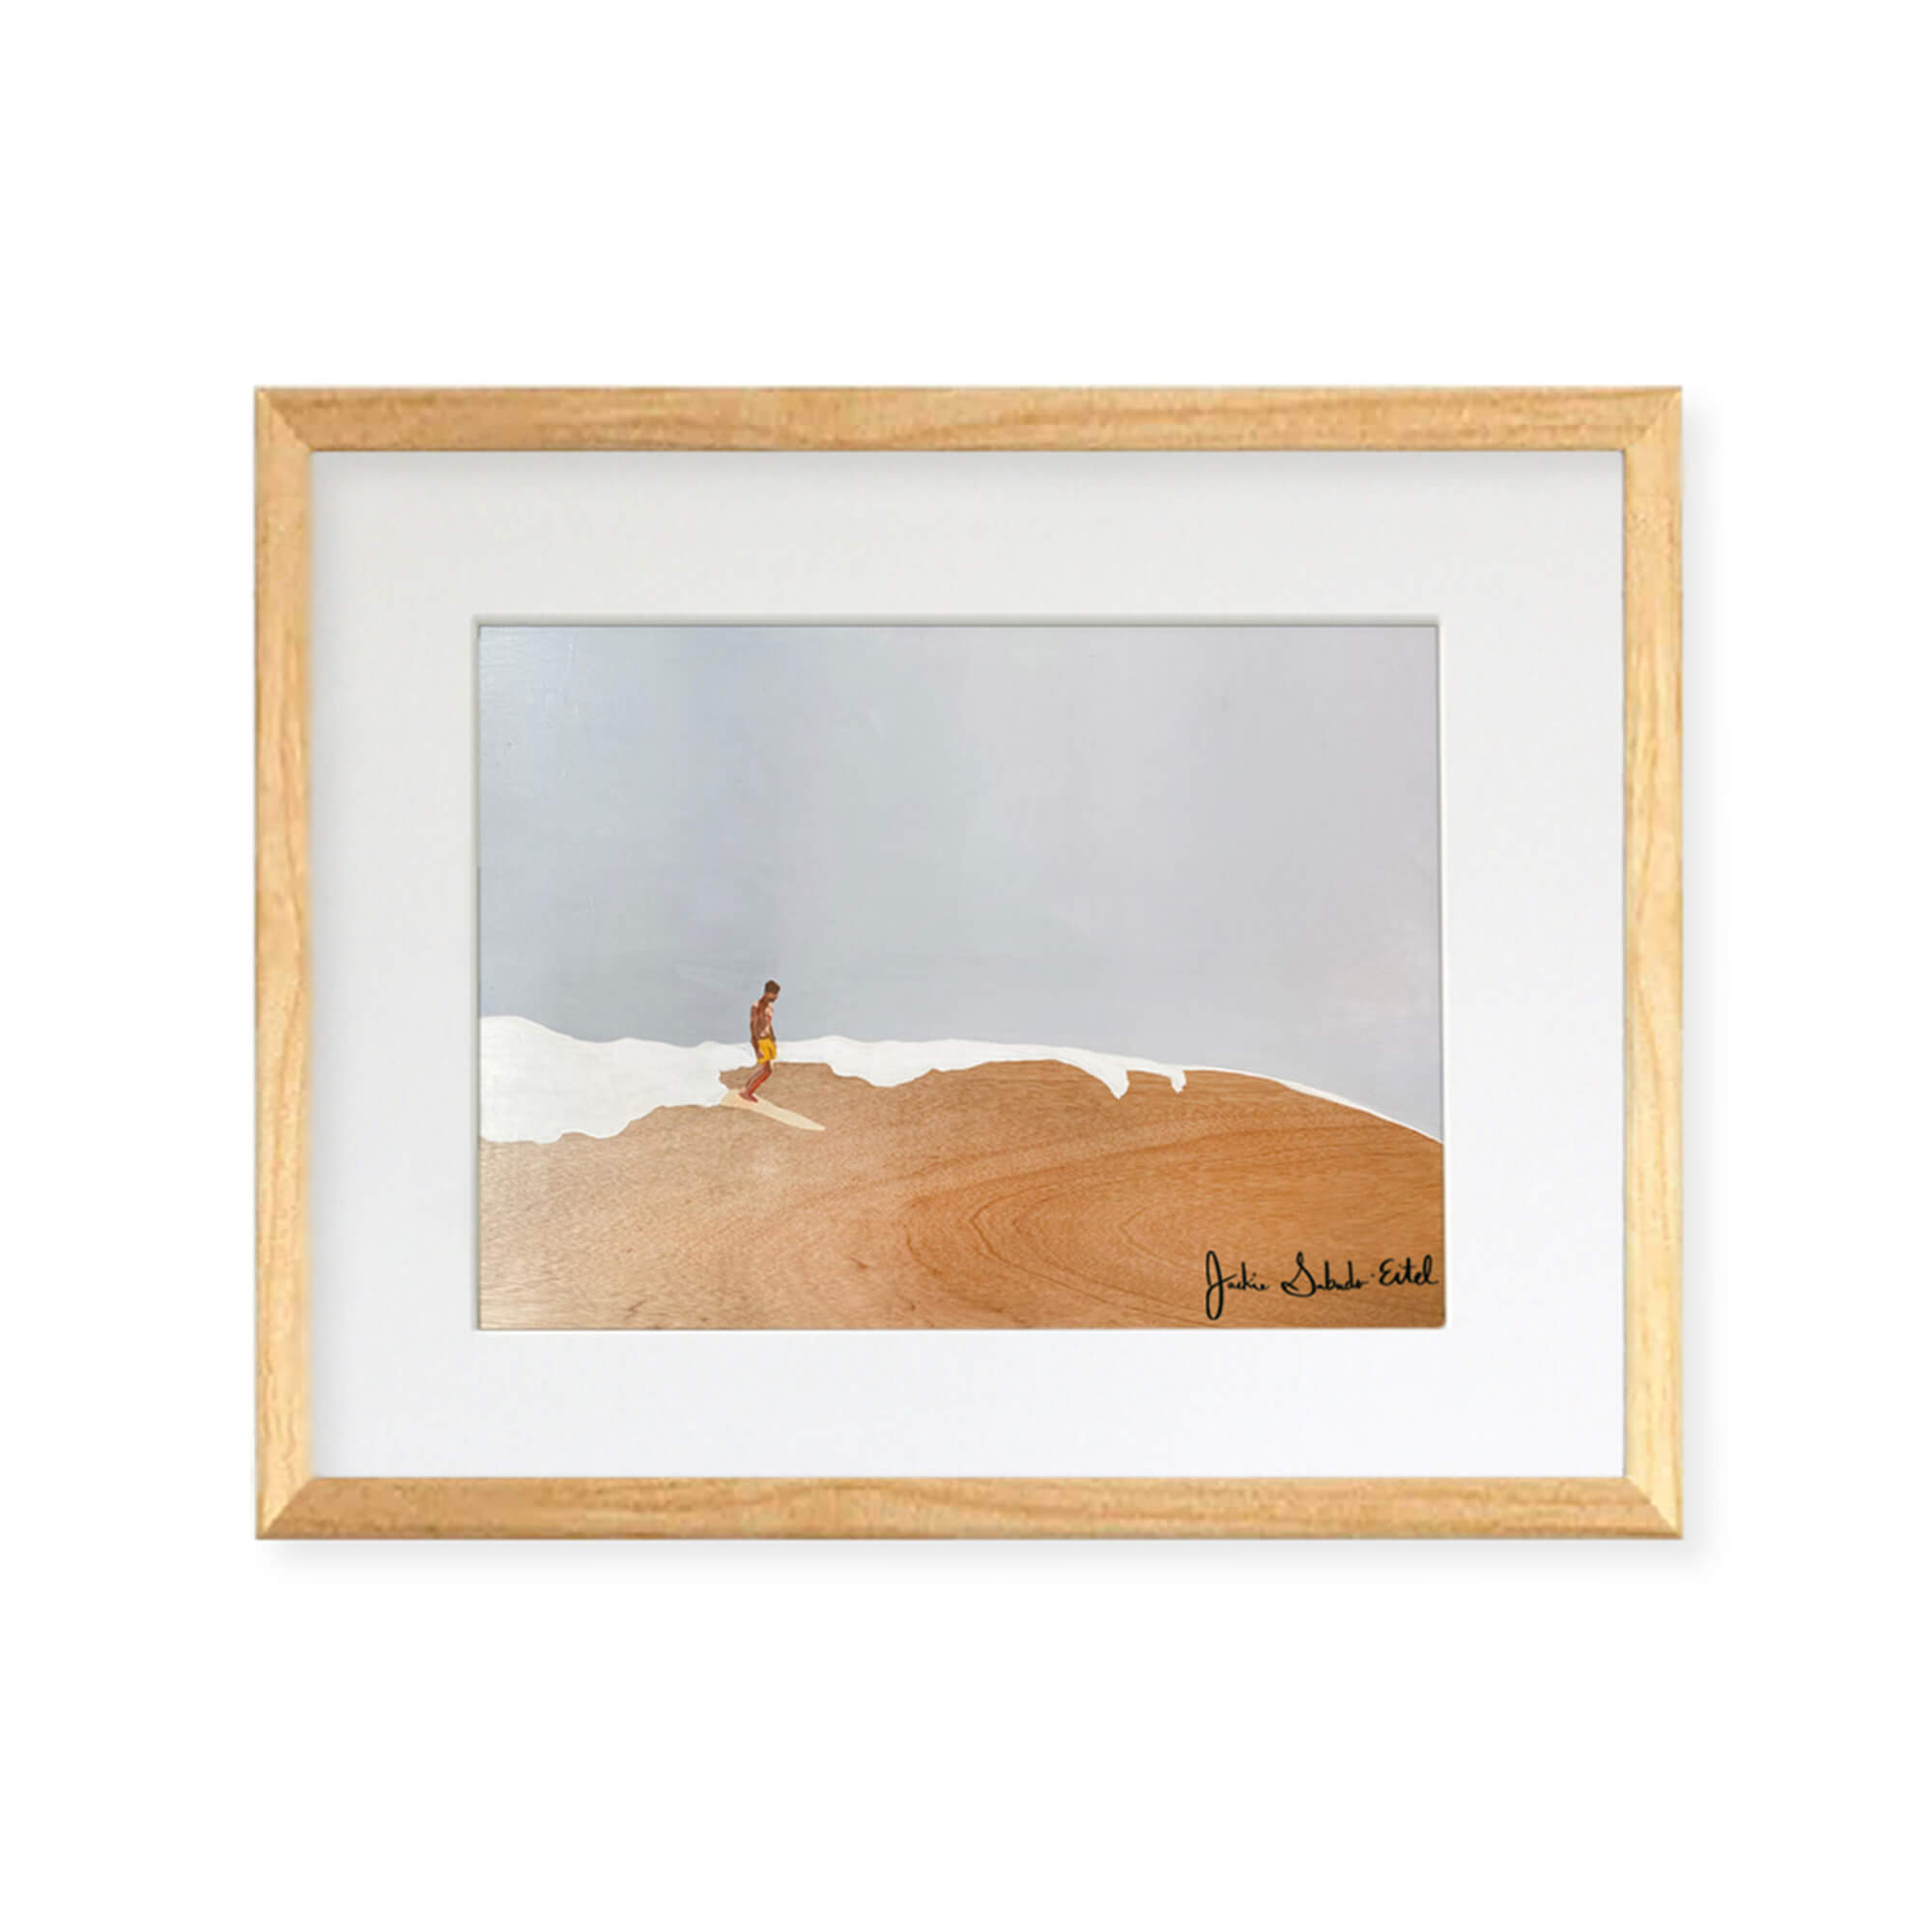 A framed matted art print featuring a man peacefully riding the epic waves of Hawaii by Hawaii artist Jackie Eitel